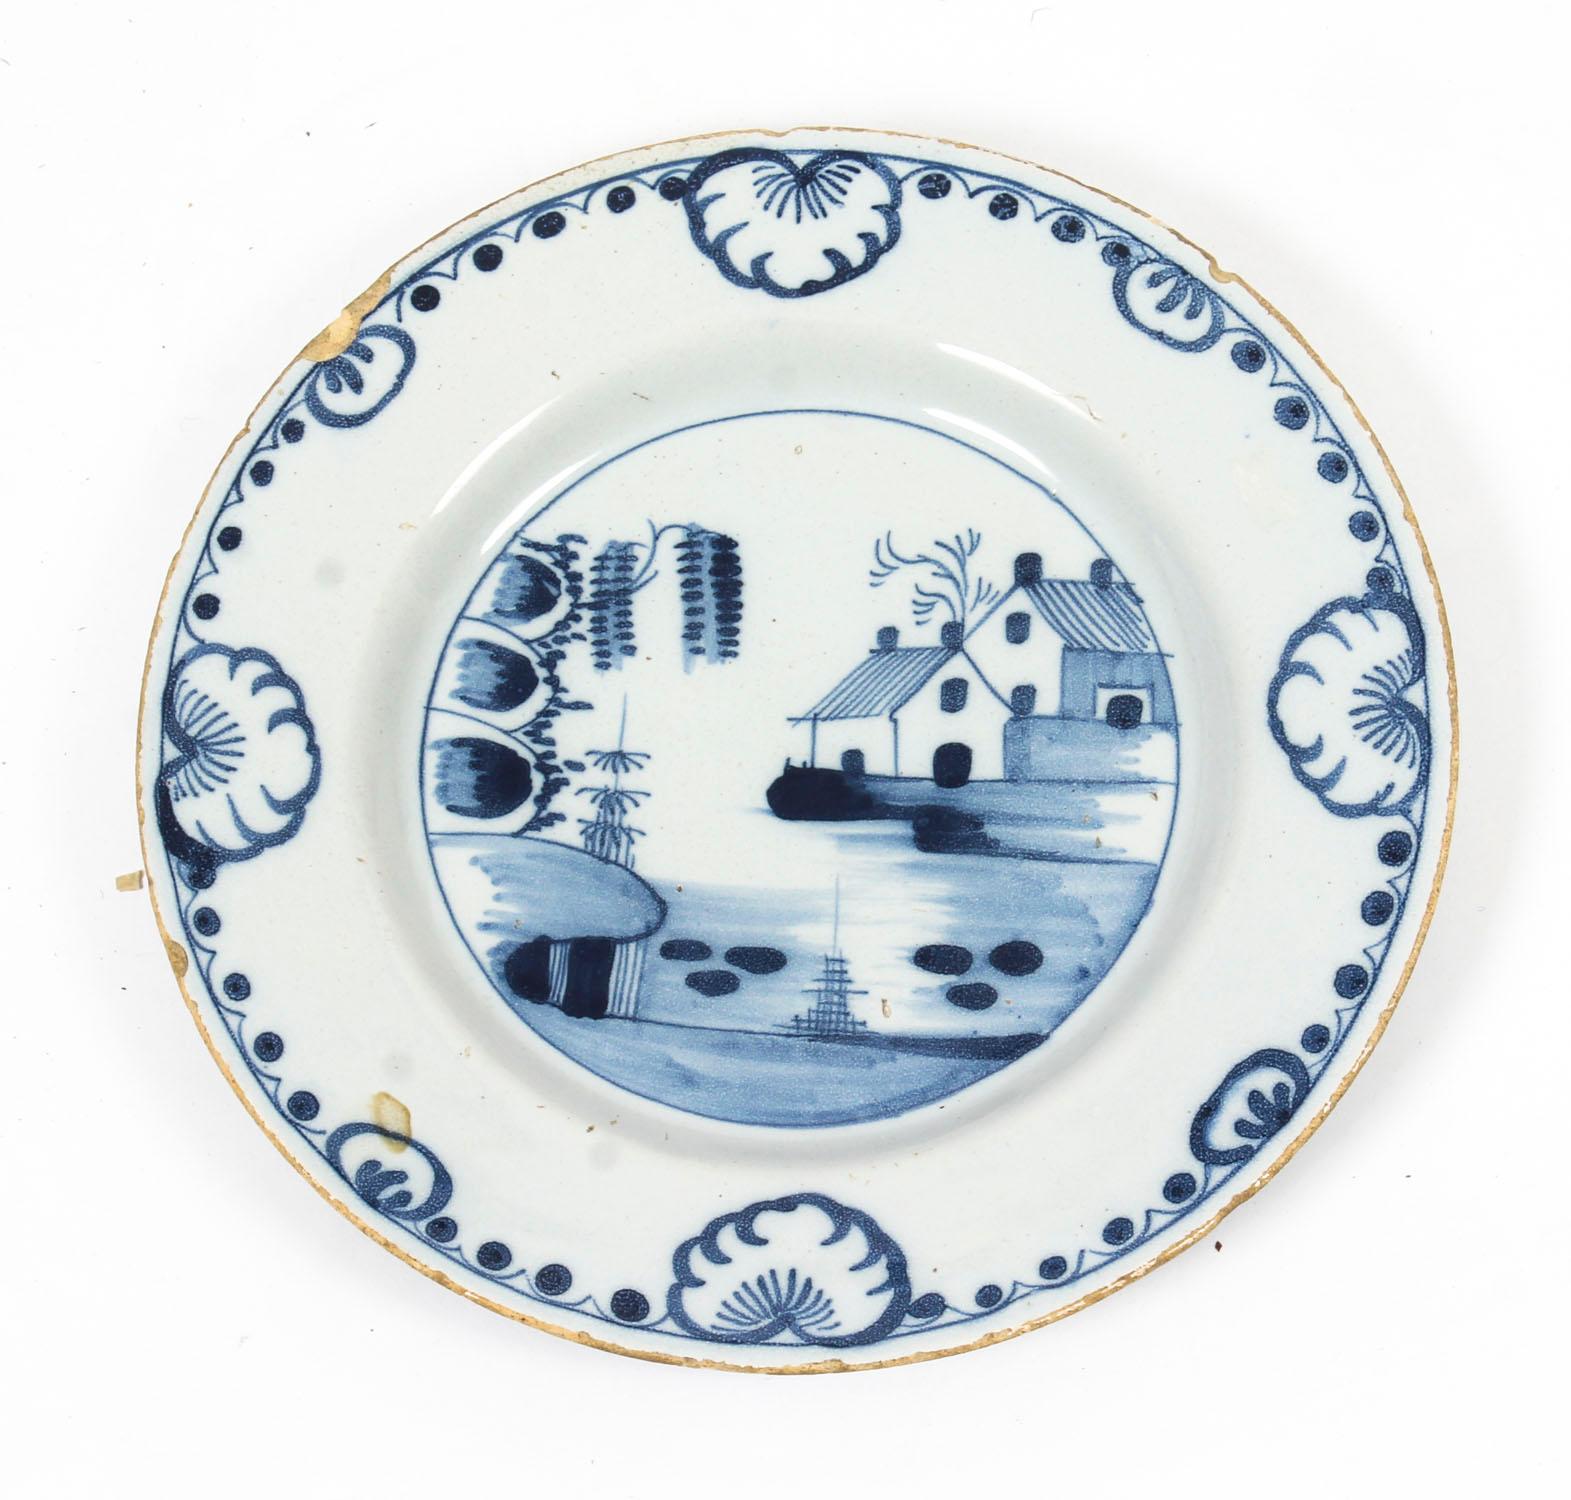 Late 18th Century Antique English Delft Blue and White Decorated Plate, 18th Century